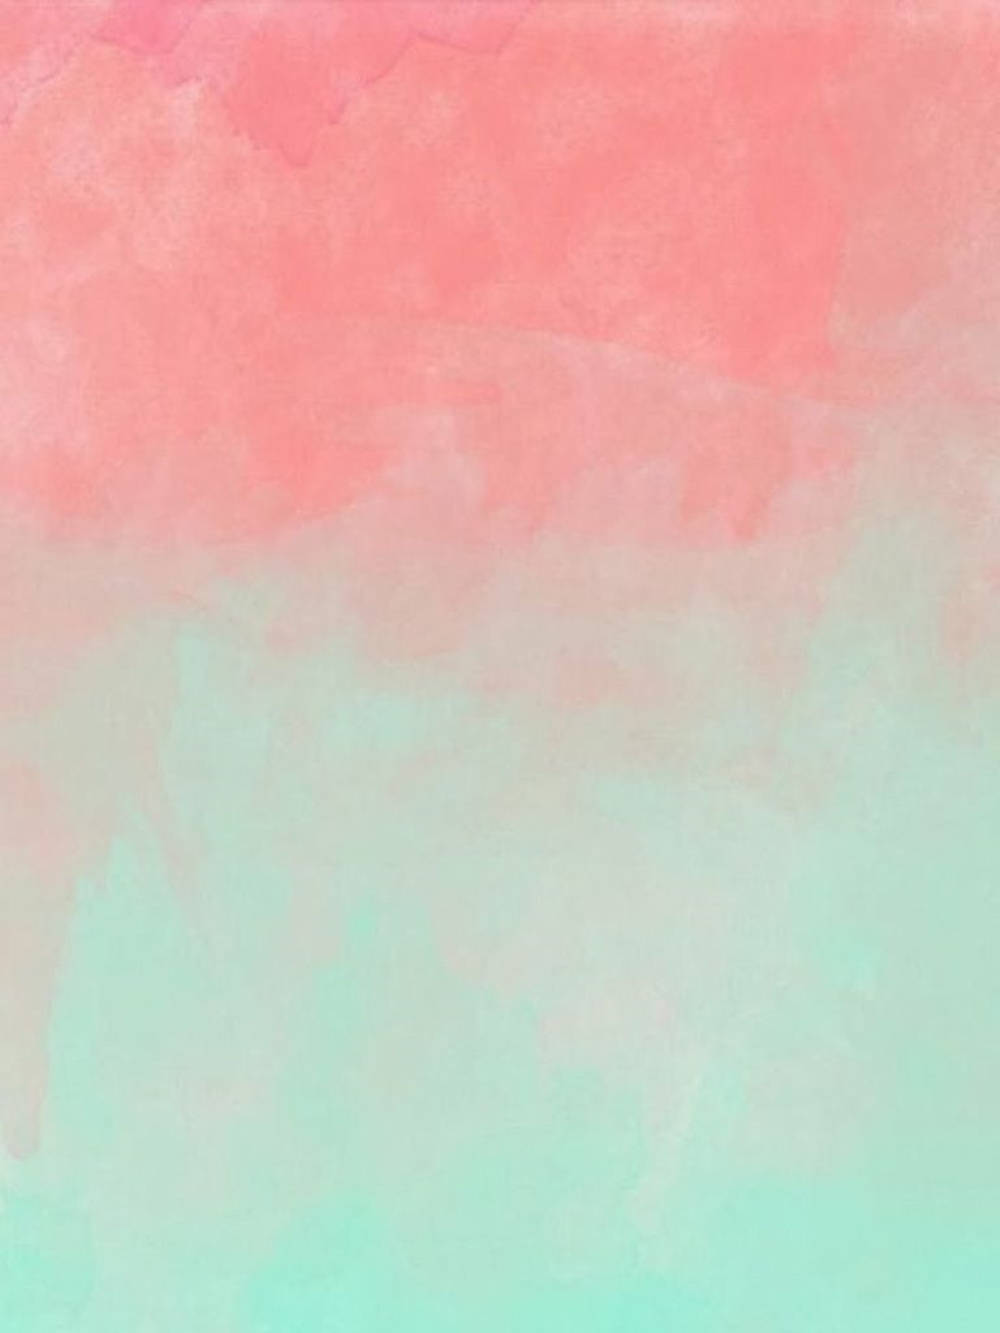 Pastel Ipad Gradient Coral And Mint Green Picture